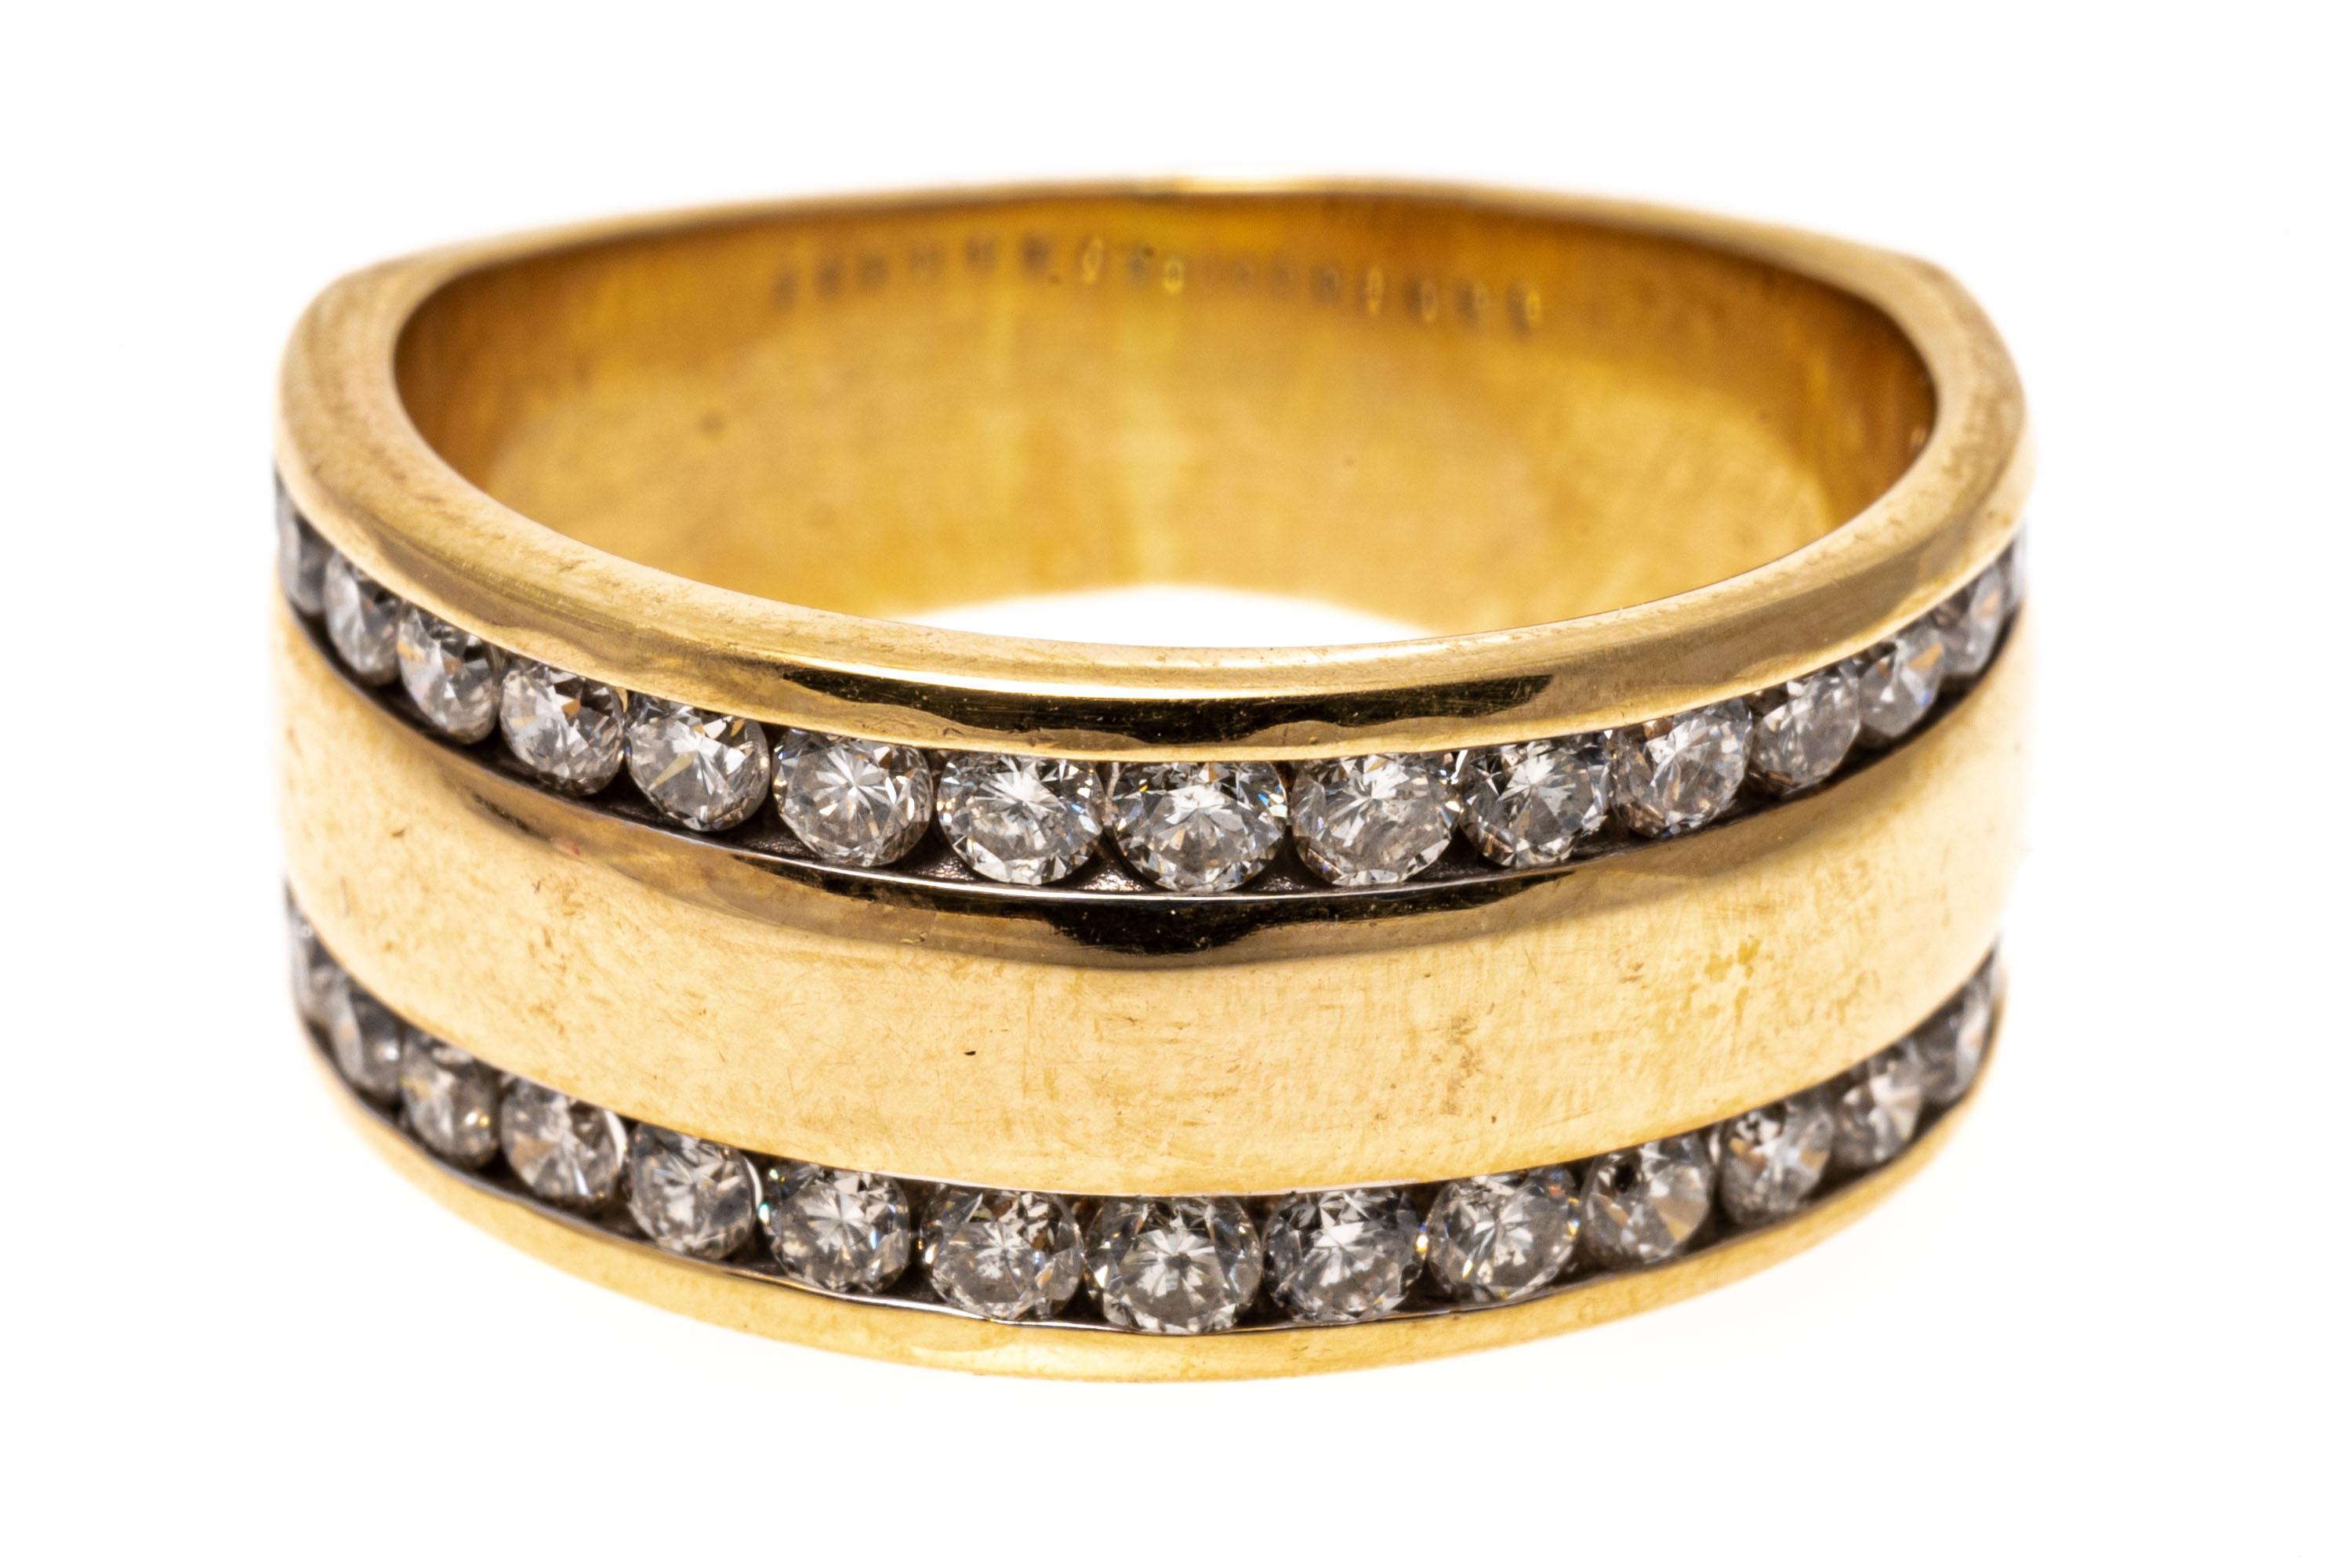 14k yellow gold ring. This stylish wide band ring is high polished, and decorated near the edges with a row of round brilliant cut diamonds, approximately 0.68 TCW, channel set.
Marks: 14k
Dimensions: 5/16